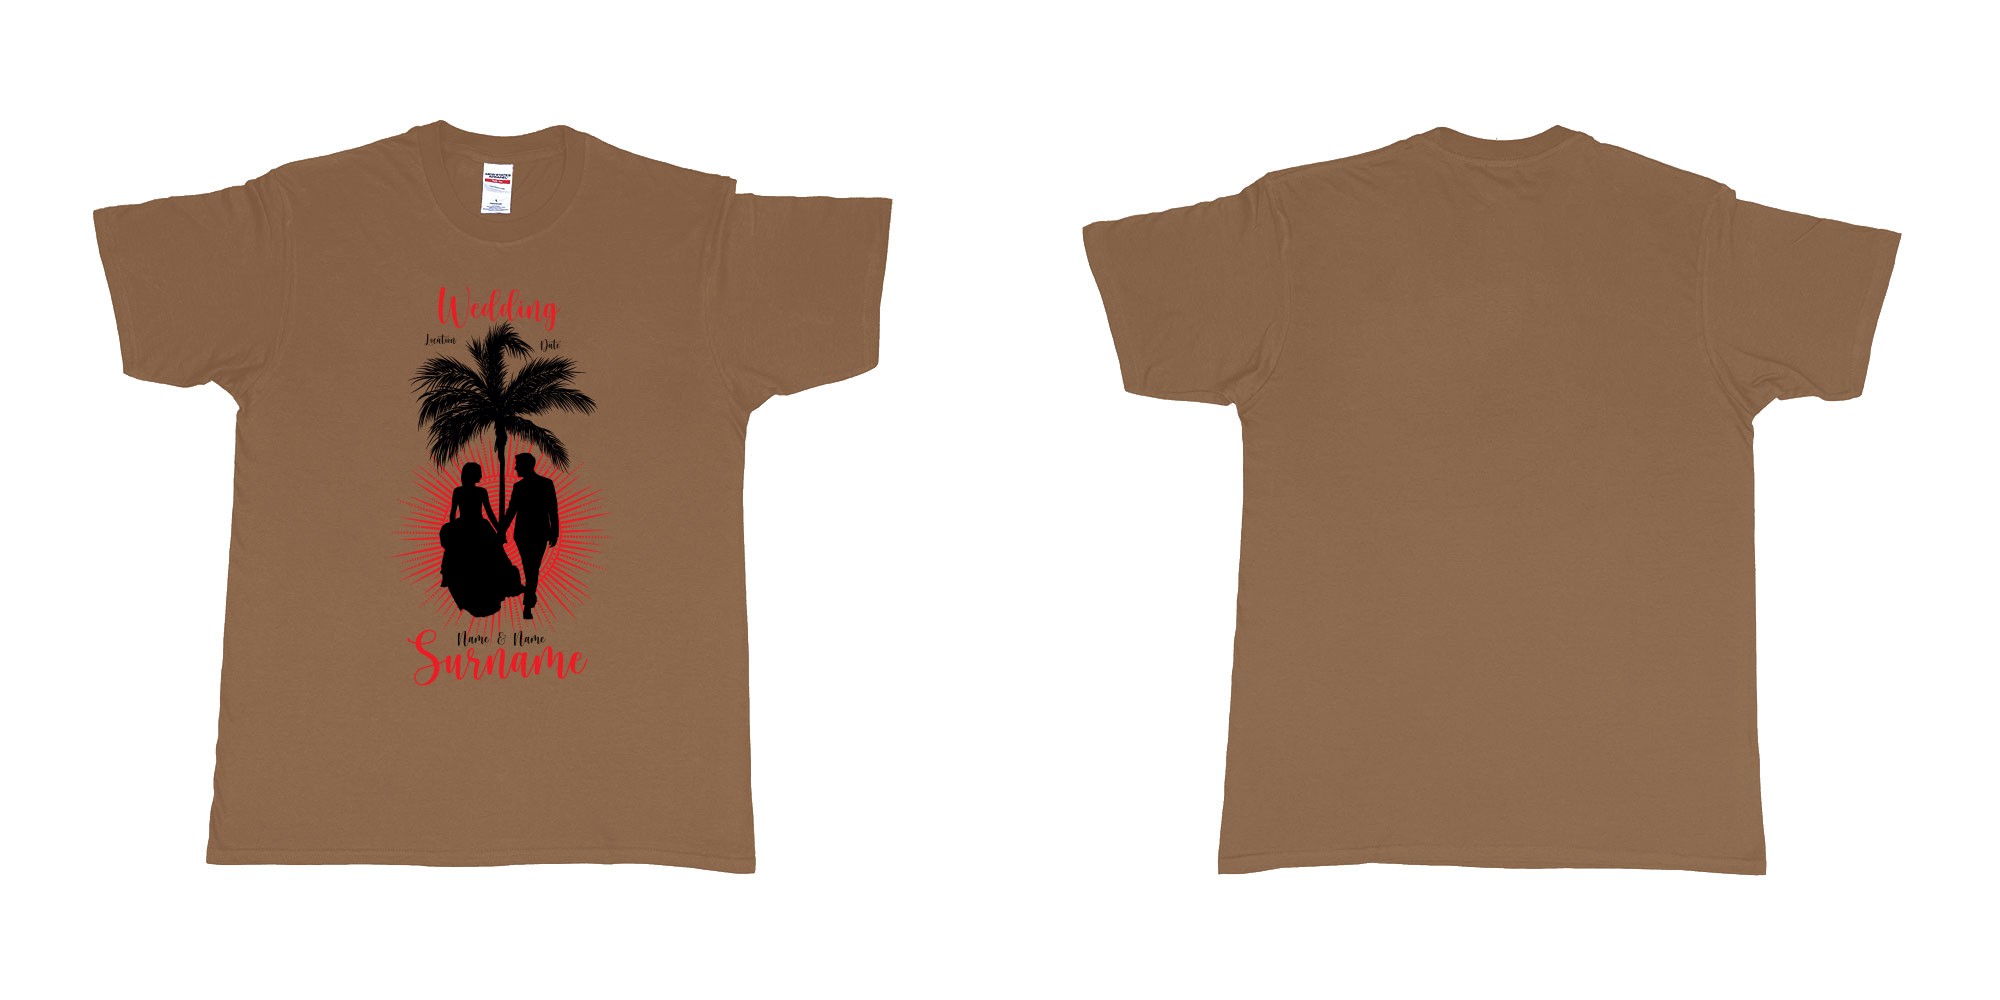 Custom tshirt design wedding palm sun bali in fabric color chestnut choice your own text made in Bali by The Pirate Way